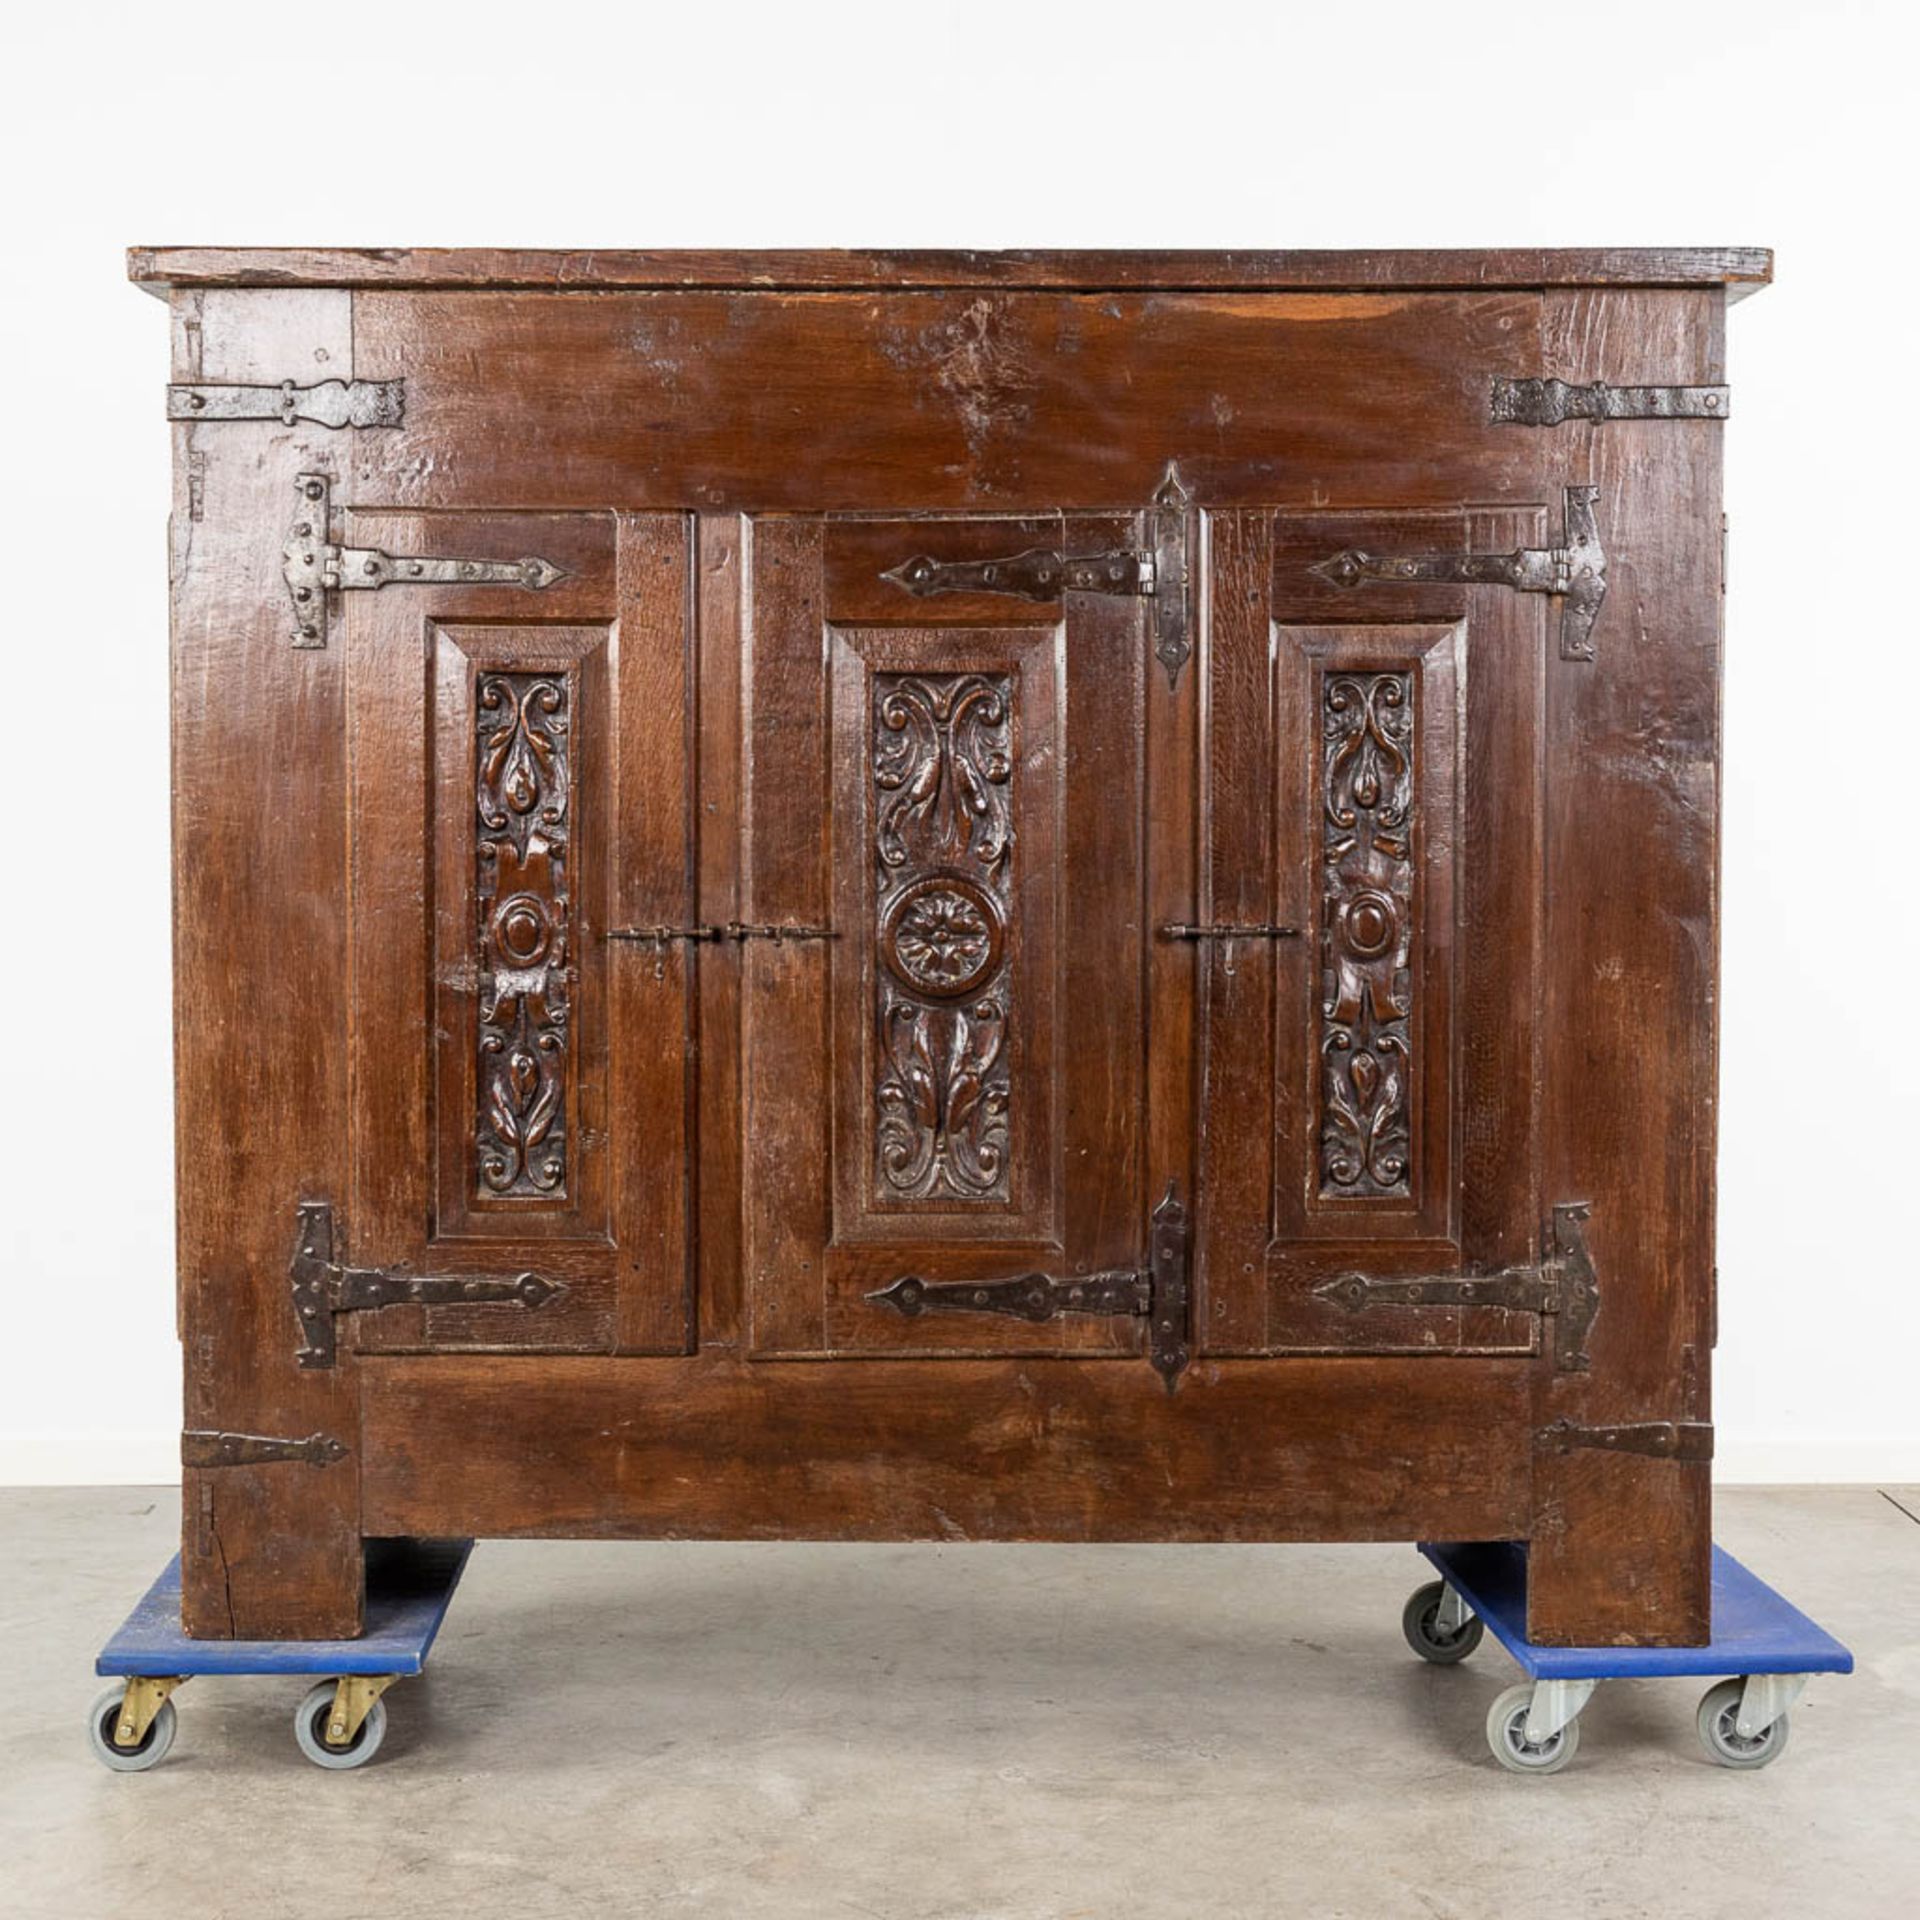 An antique three-door cabinet with sculptured oak doors, France, 17th C. (L: 55 x W: 175 x H: 151 cm - Image 4 of 23